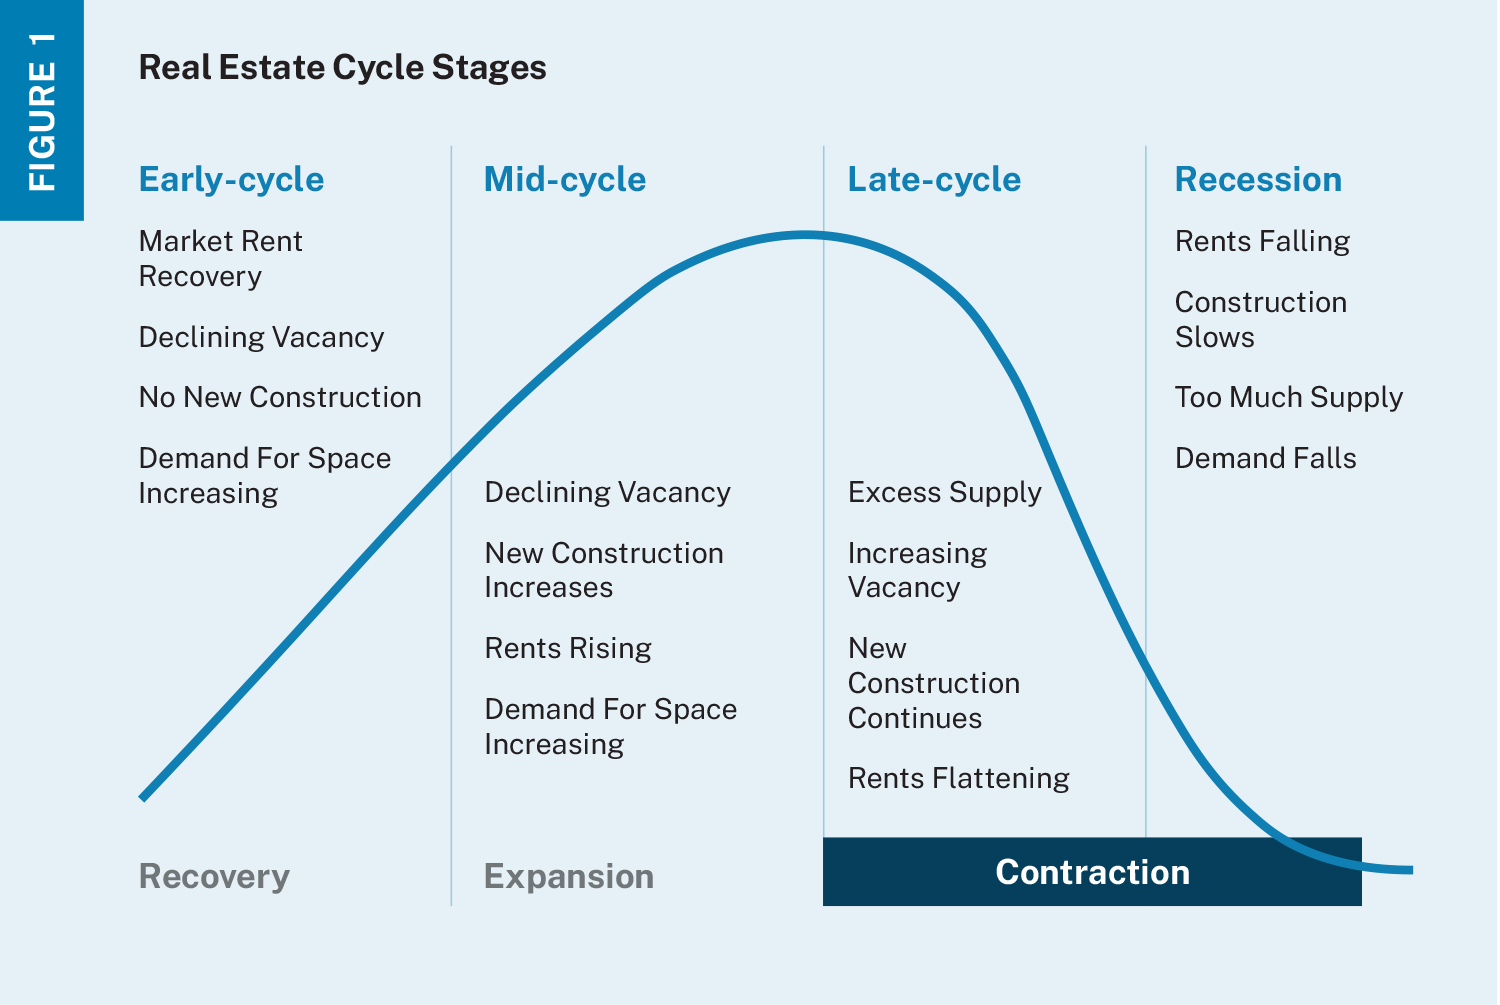 Image depicting a hill-like curve depicting the various stages of the real estate cycle, from early cycle (lower portion of the uphill) to late cycle (surpassing the crest of the curve) into recession (downslope). 